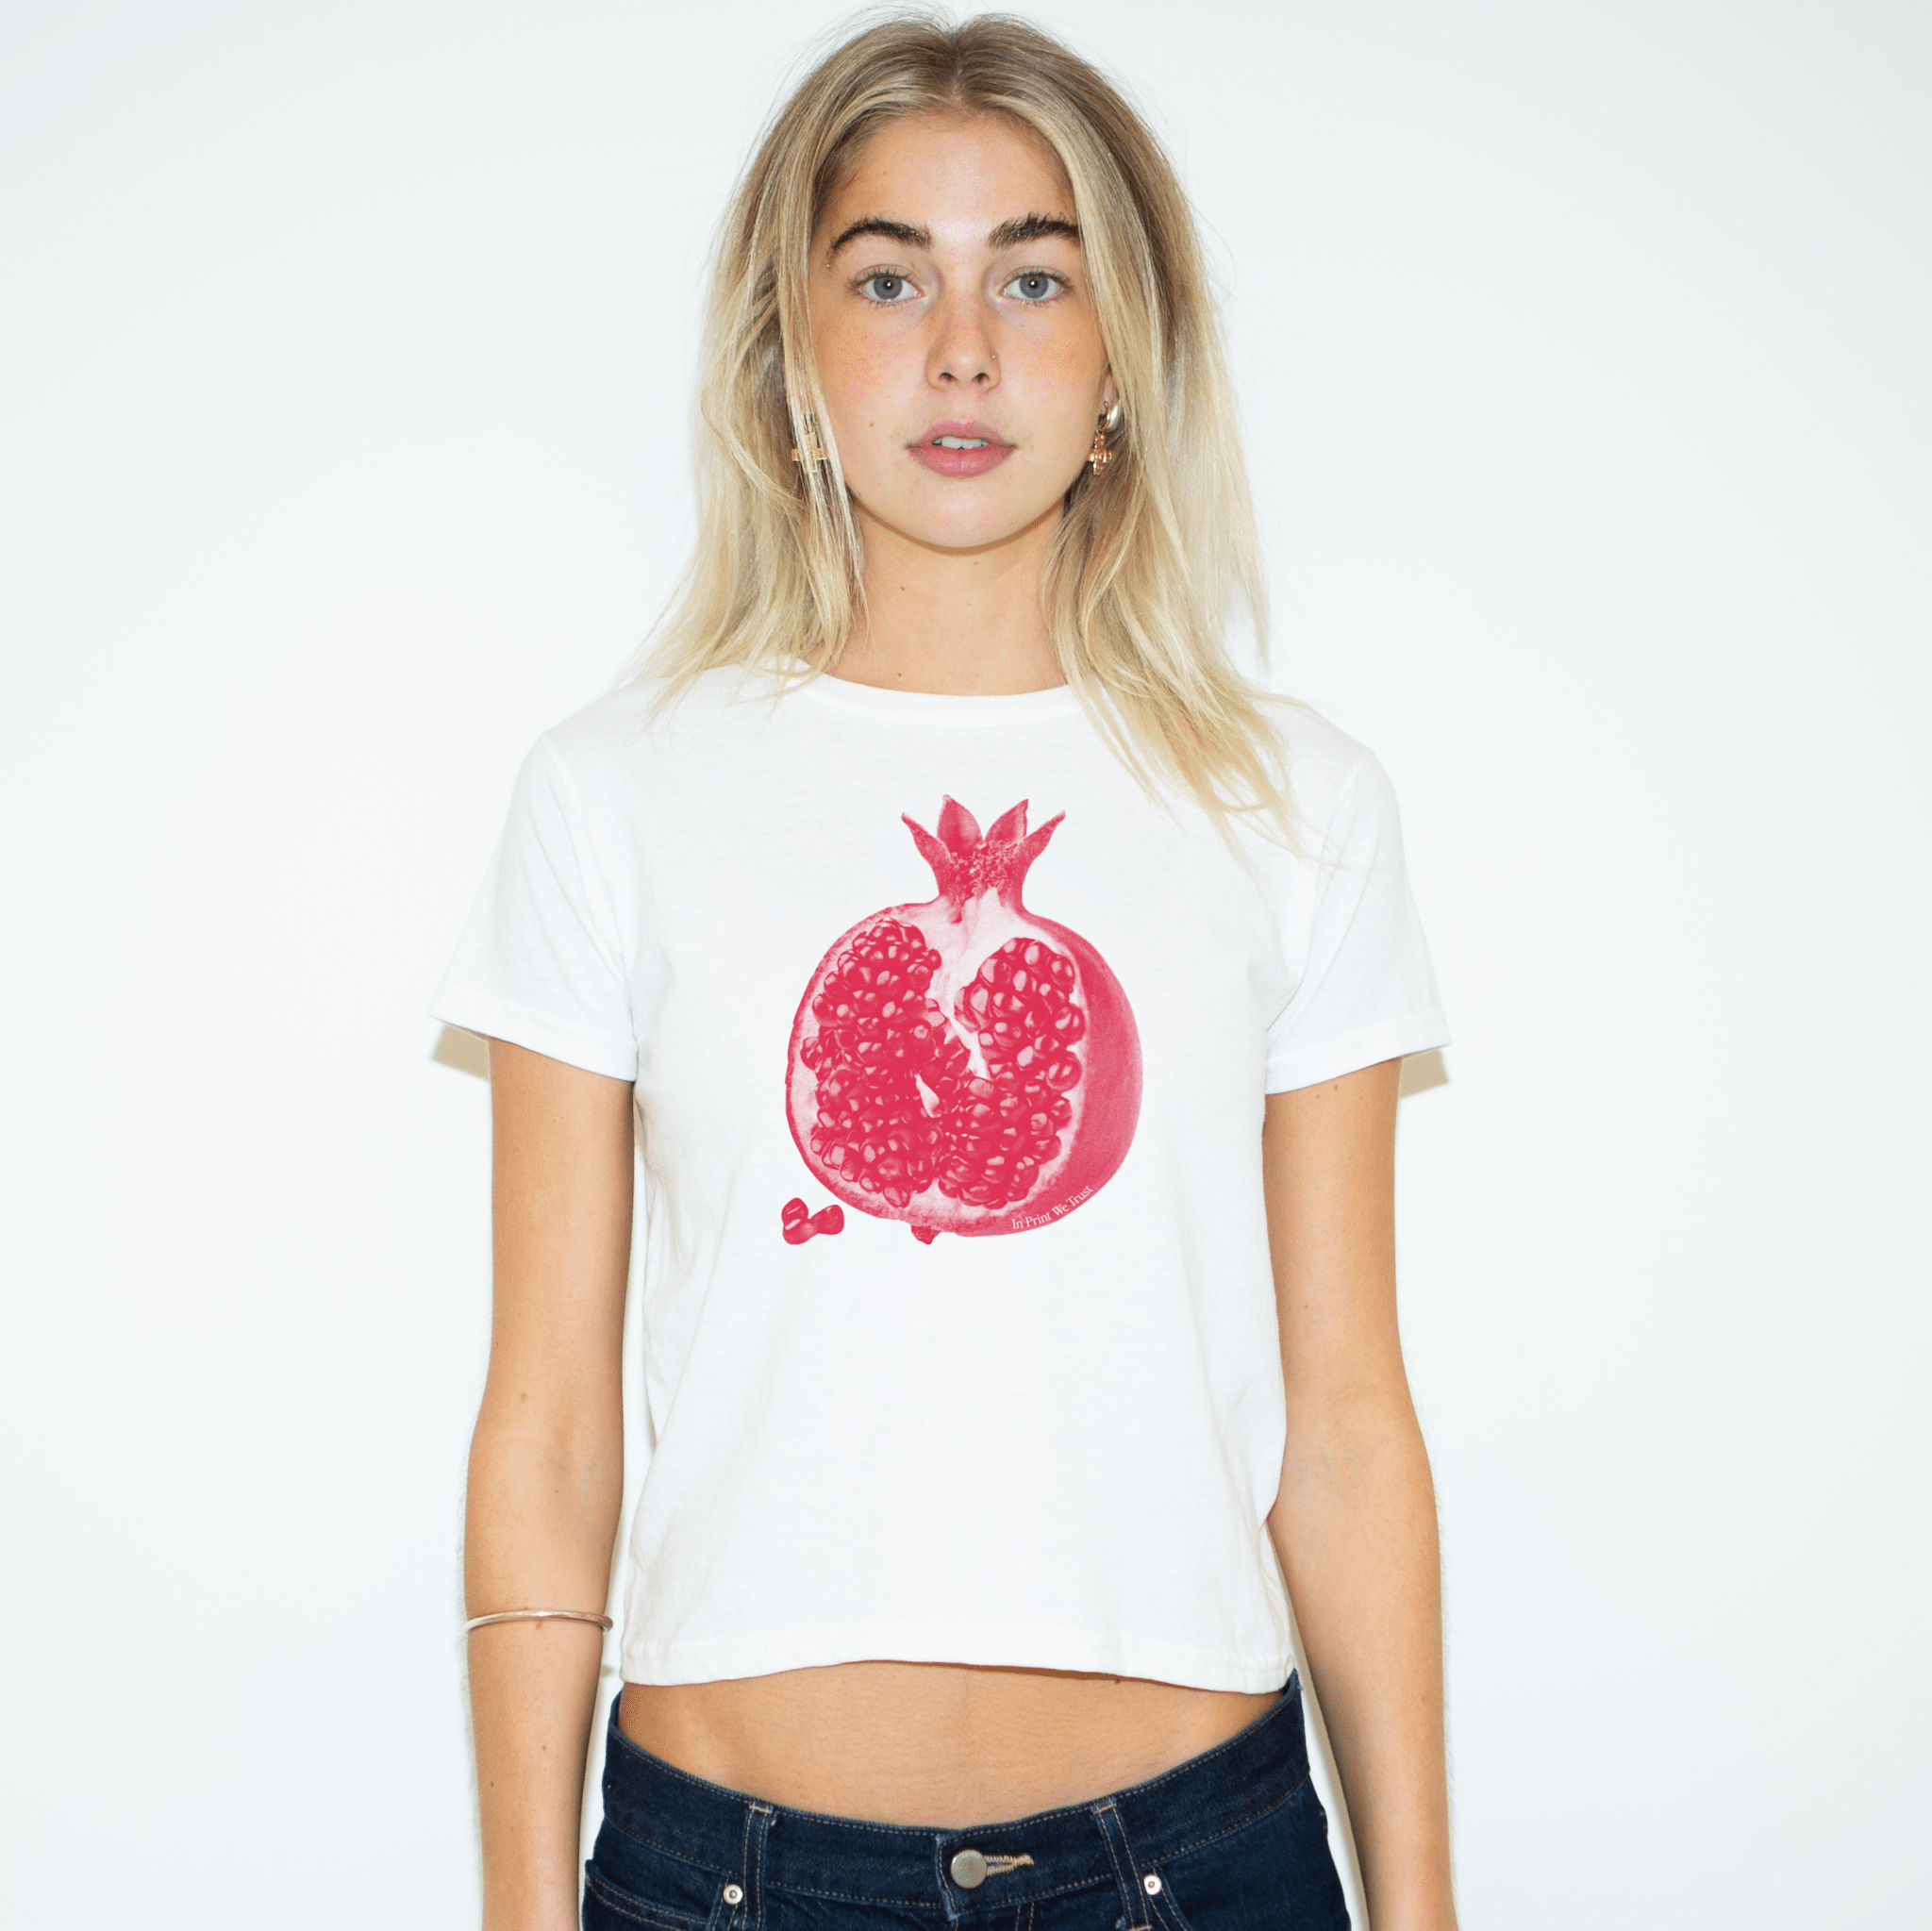 'Pomegranate' baby tee - In Print We Trust